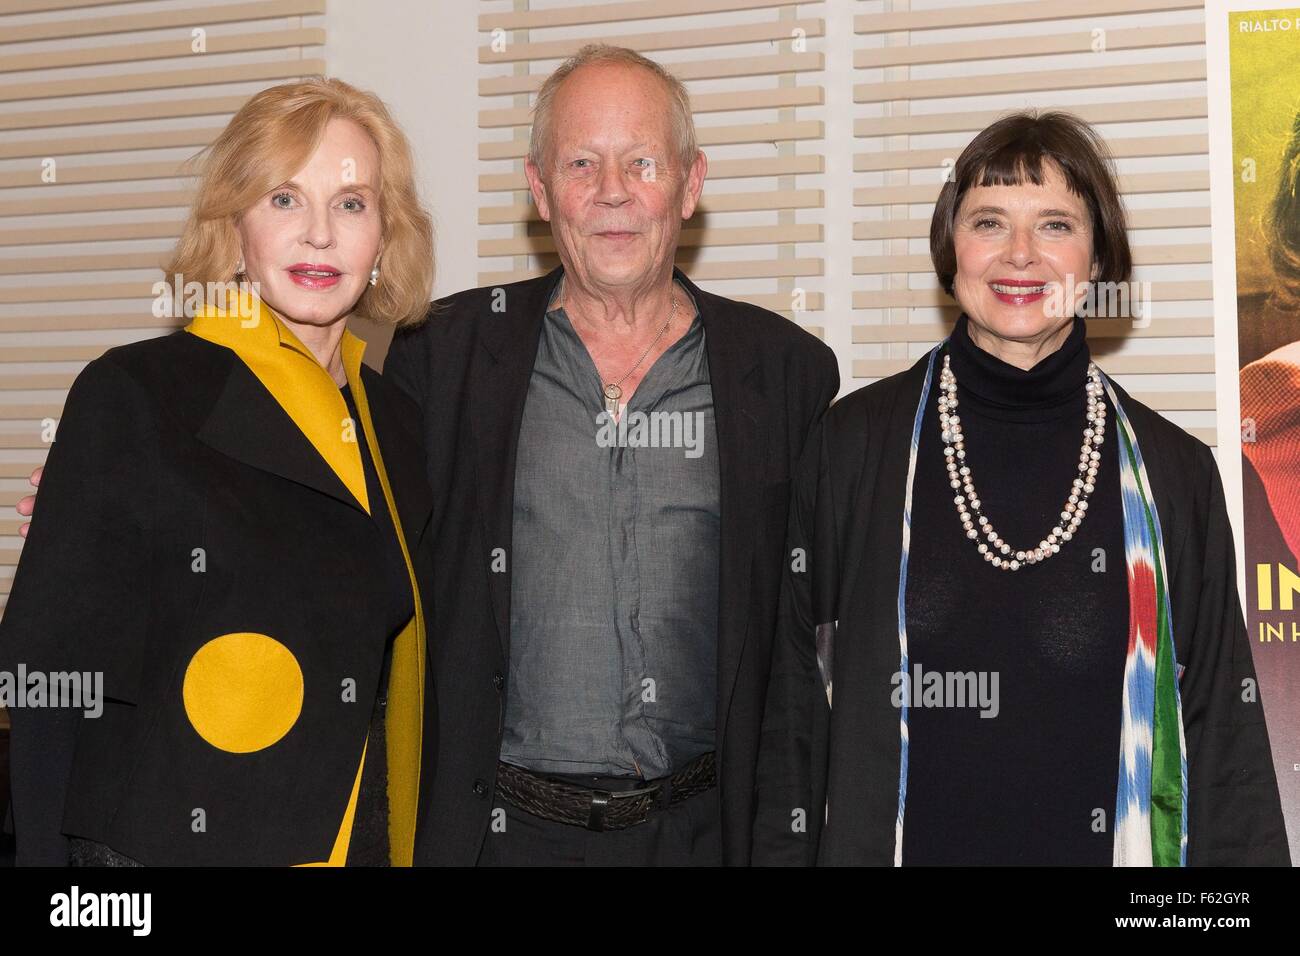 New York, NY, USA. 10th Nov, 2015. Pia Lindstrom, Stig Bjorkman, Isabella Rossellini at arrivals for INGRID BERGMAN: IN HER OWN WORDS Screening Presented by Rialto Pictures and Scandinavia House, Scandinavia House, New York, NY November 10, 2015. Credit:  Jason Smith/Everett Collection/Alamy Live News Stock Photo